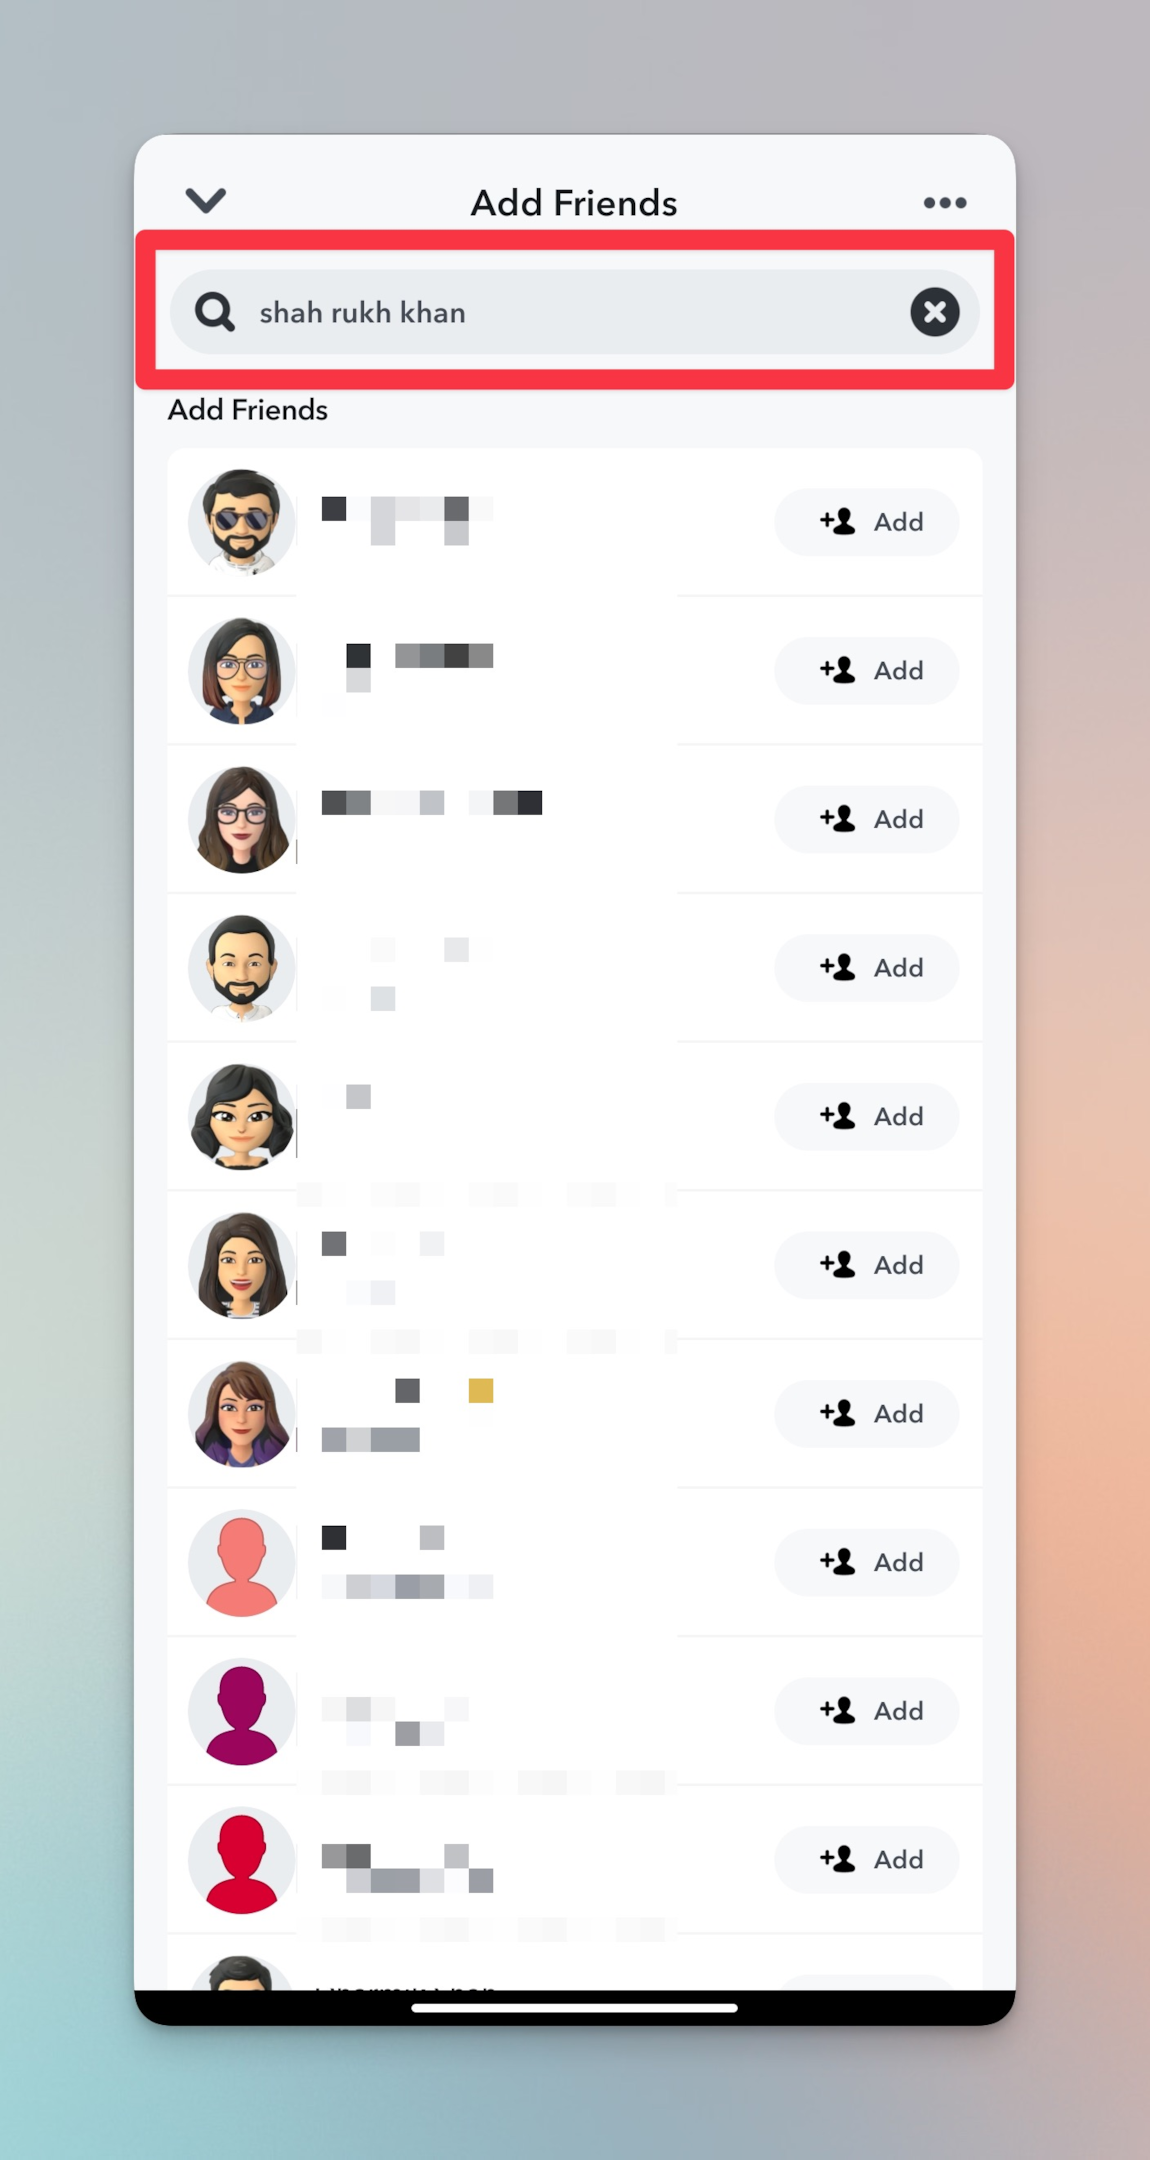 Remote.tools shows how to search for usernames & add as friends 